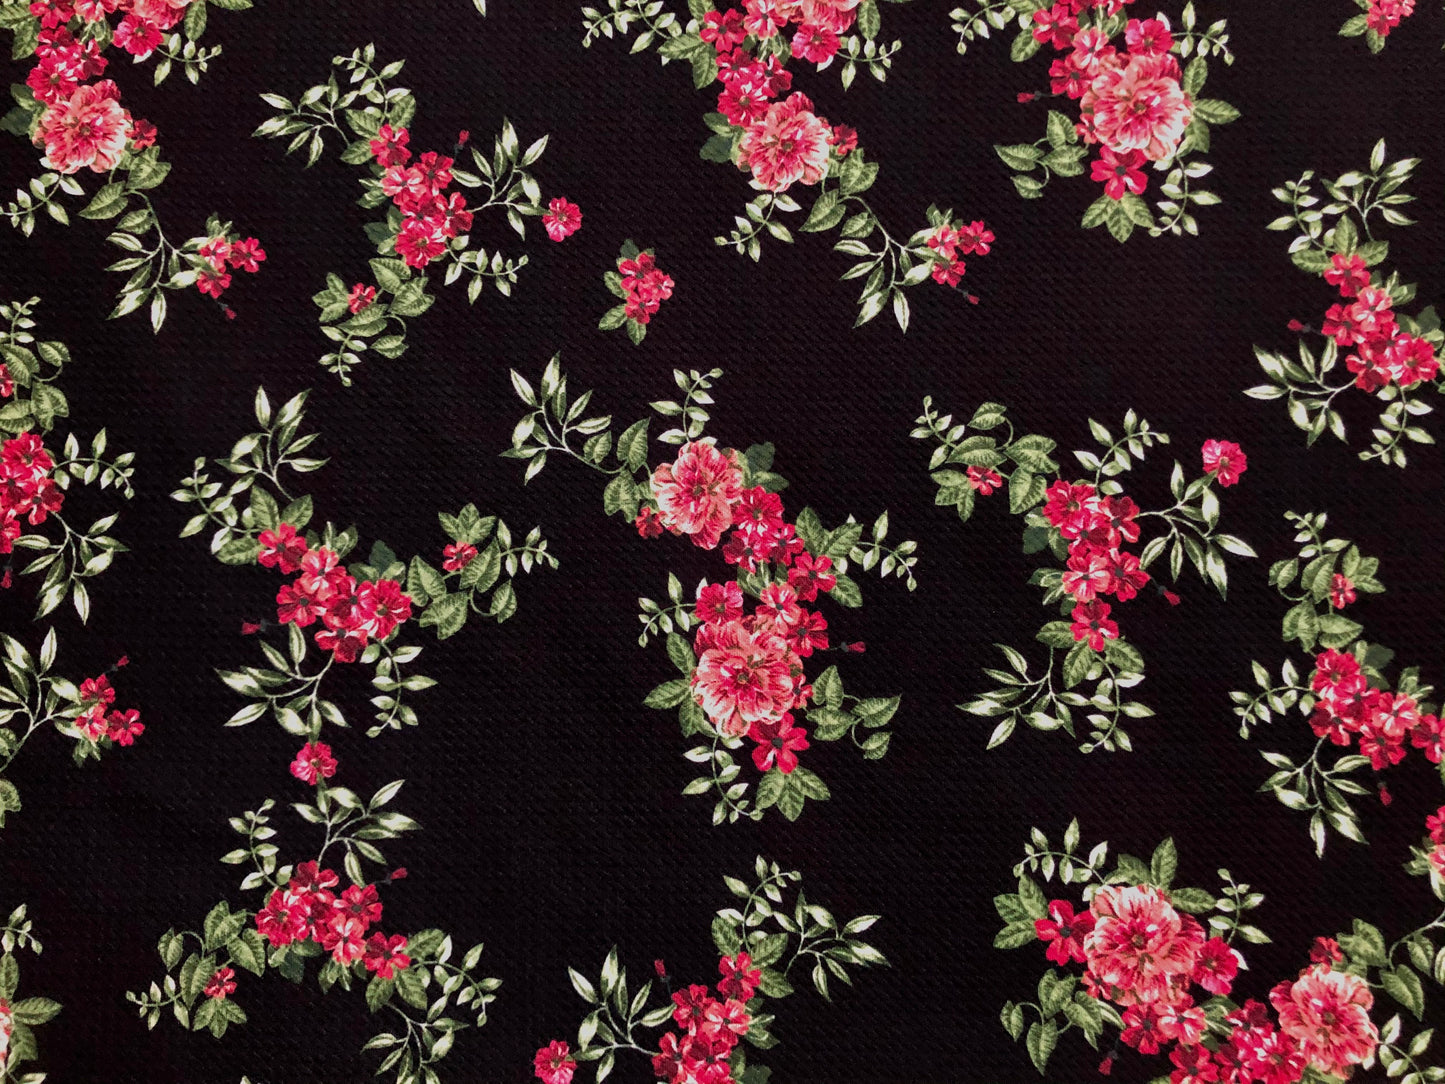 Bullet knit Printed Fabric-Black Red Spring Flowers-BPR224-Sold by the Yard